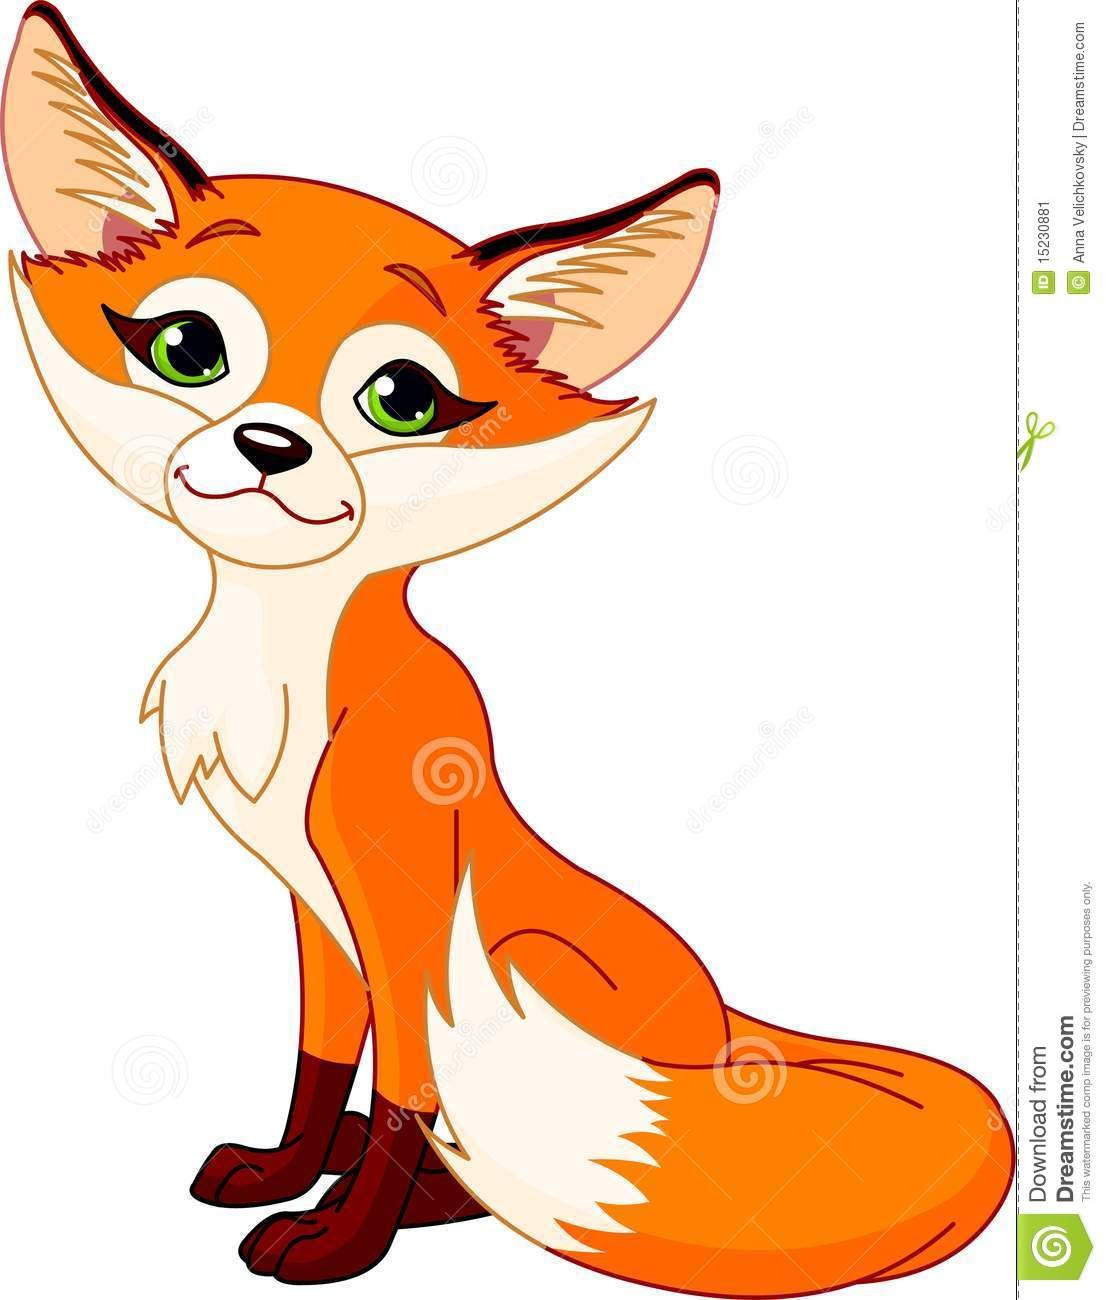 Baby fox with glasses clipart clipart images gallery for.